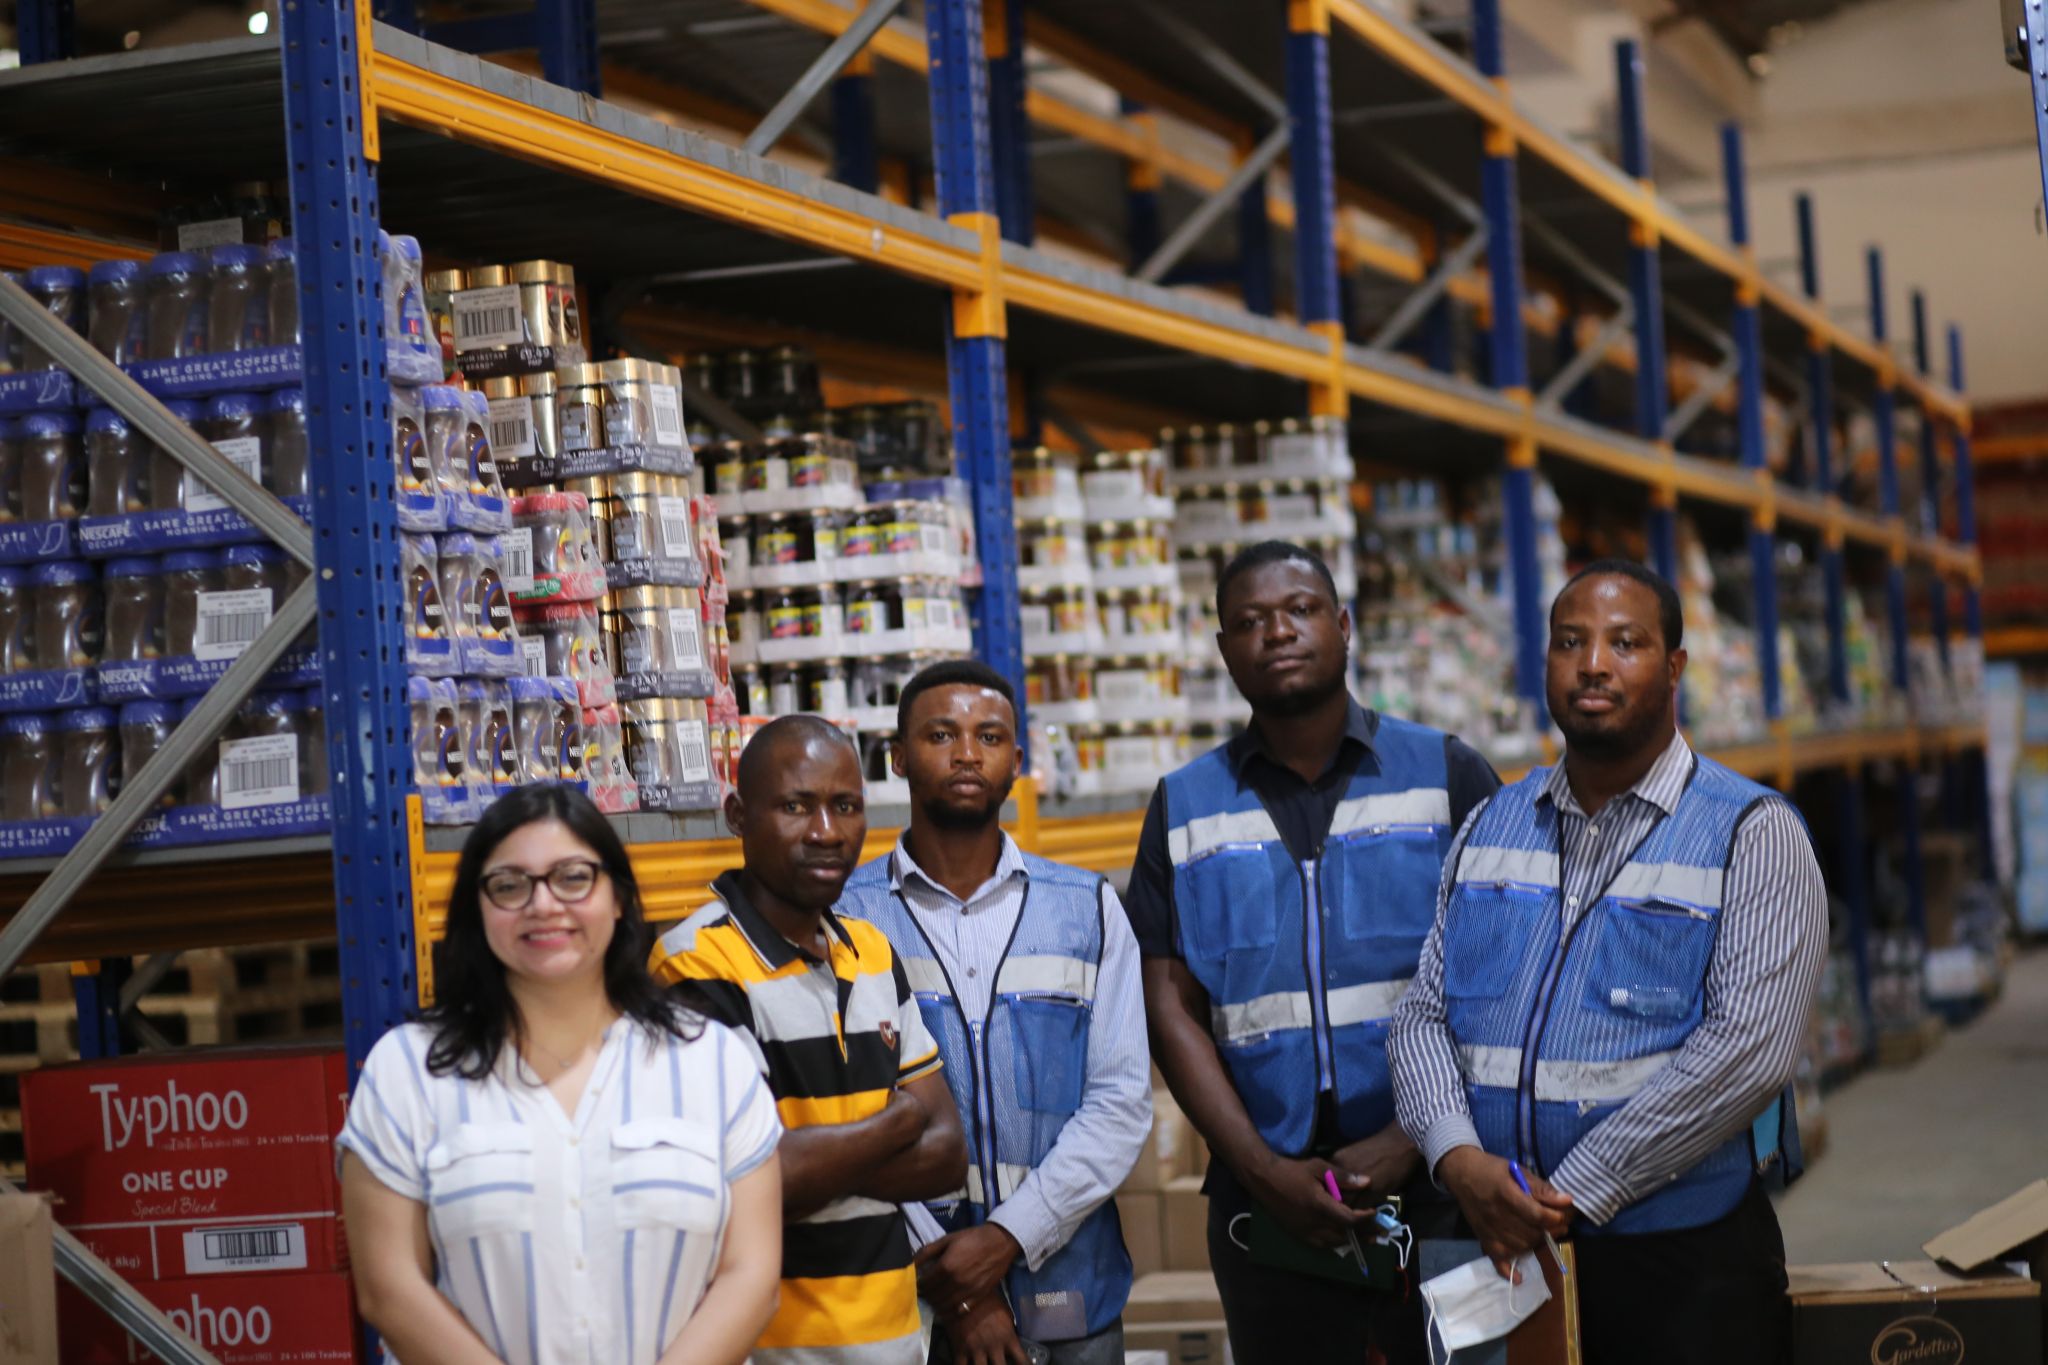 Gaby Kafarhire (left), GFN's Middle East and Africa associate program director, stands with leaders from Food For All Africa in their warehouse in Accra, Ghana. (Photo: Food For All Africa)